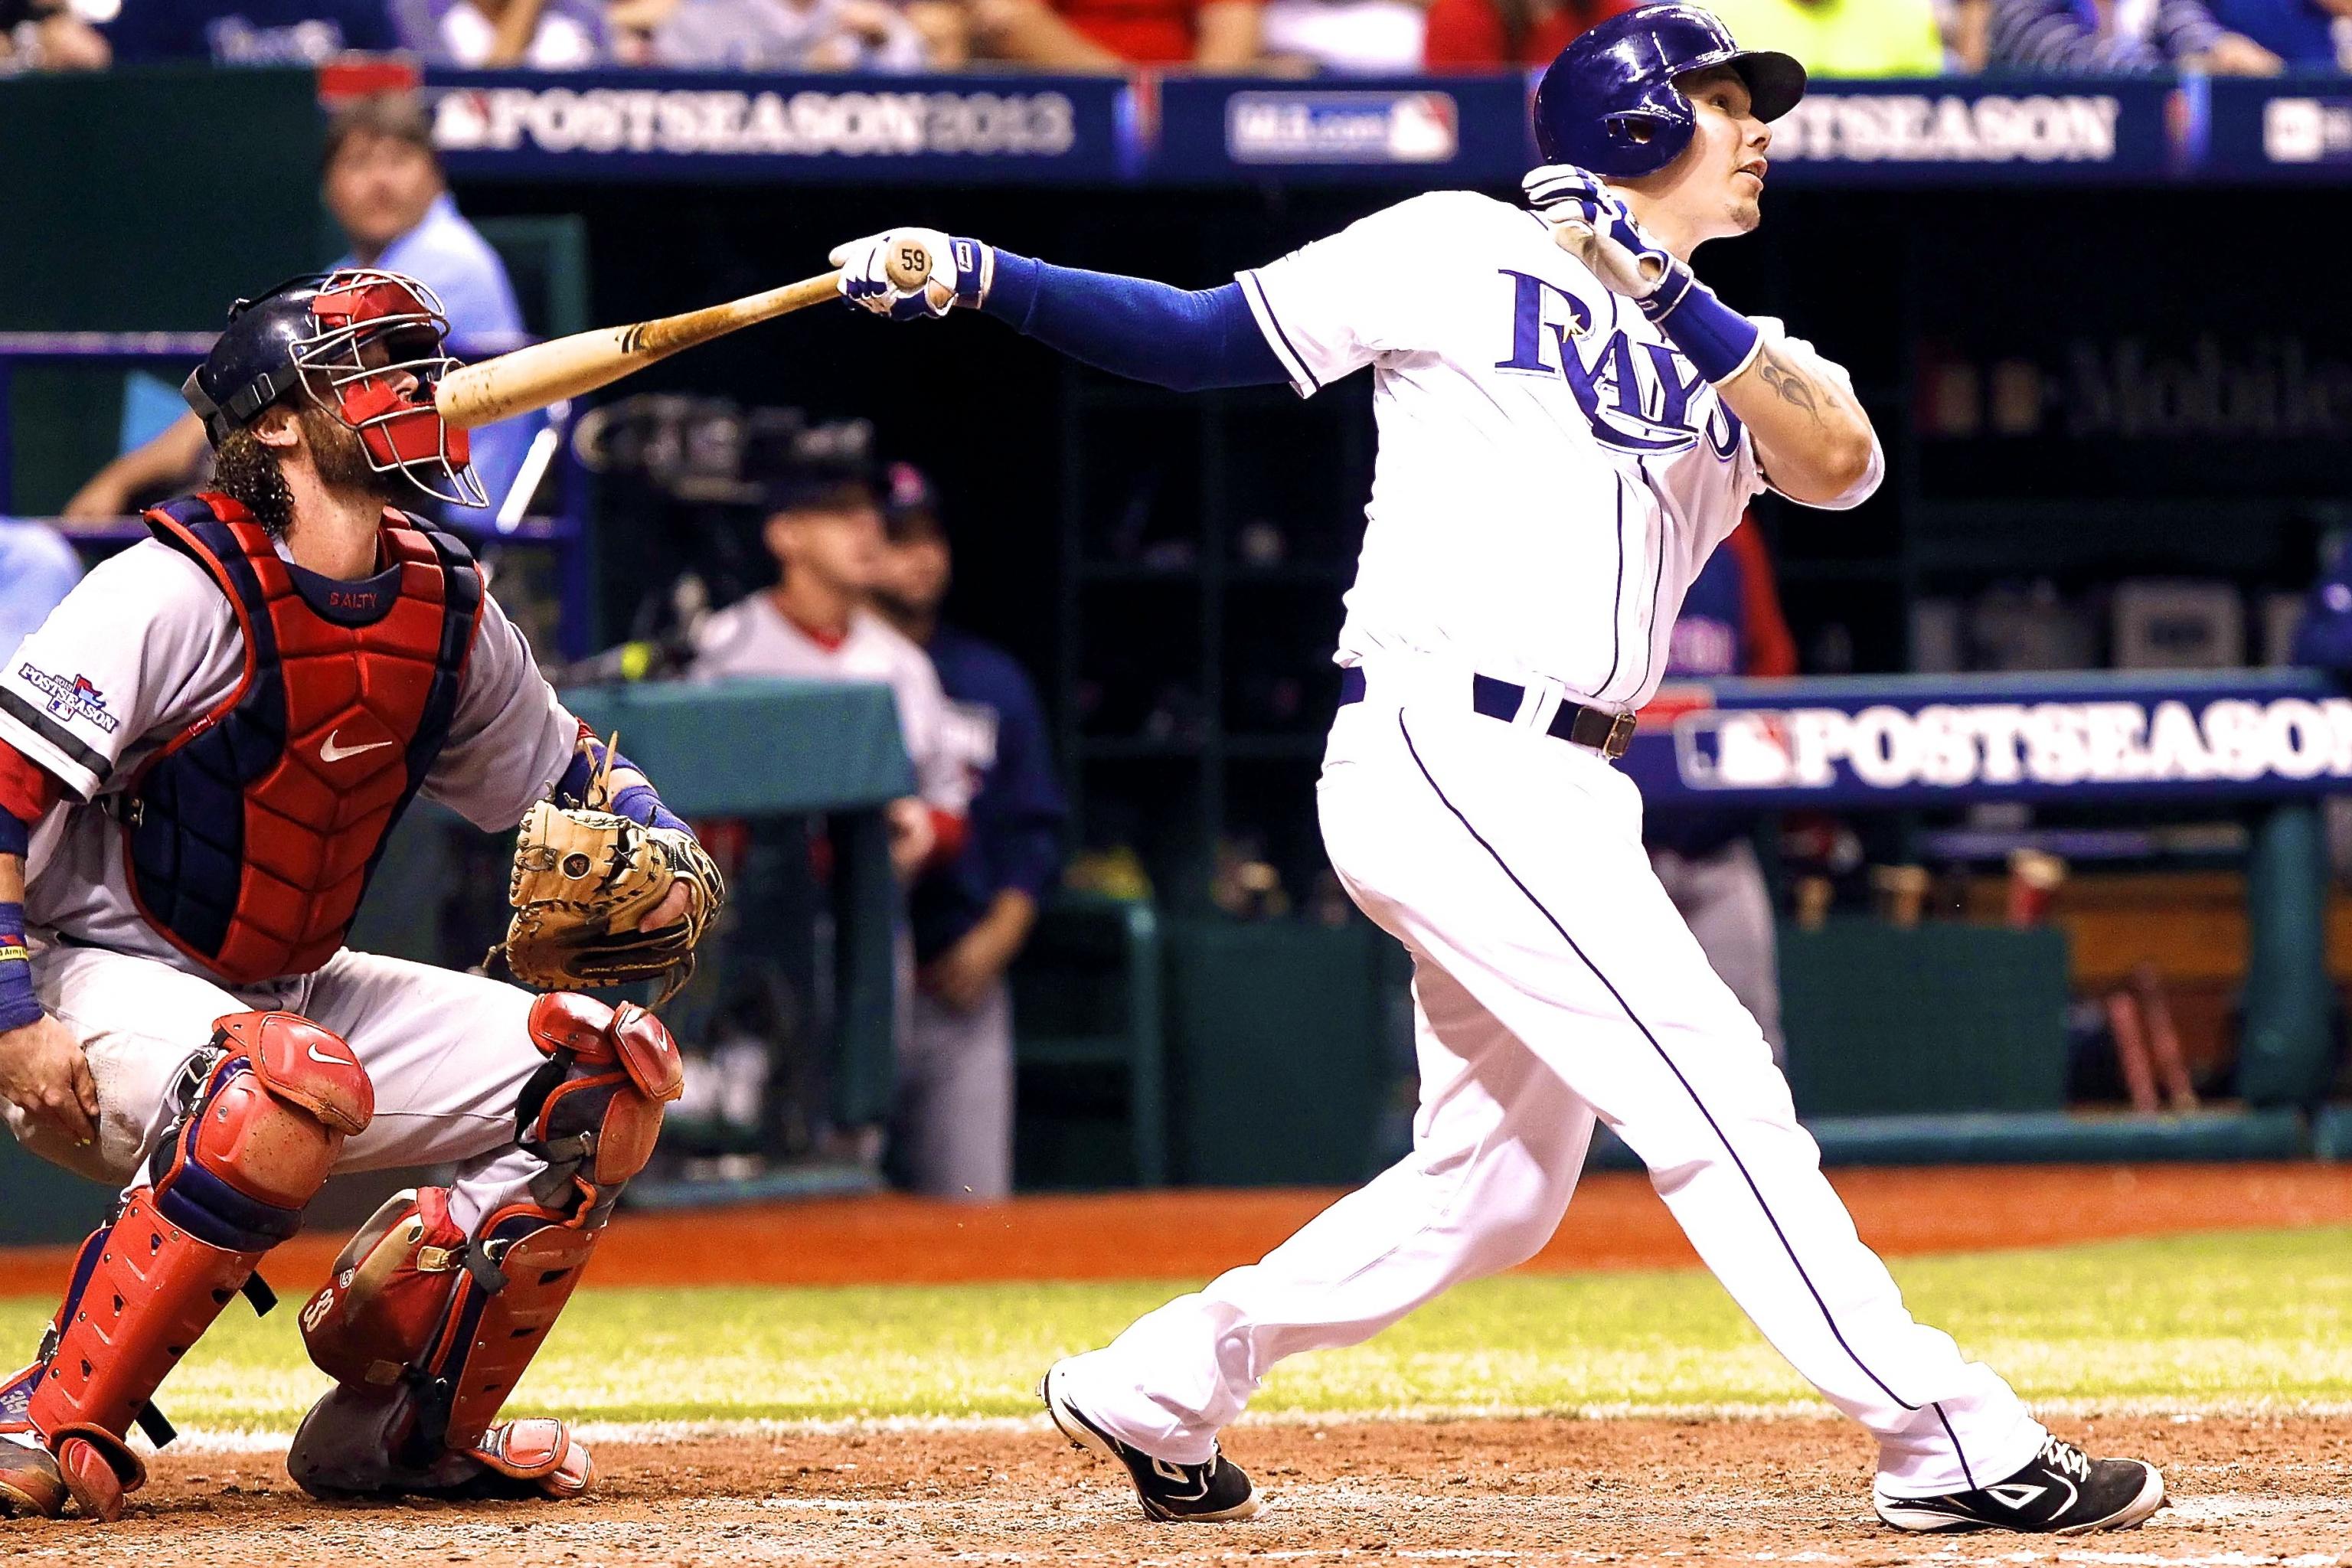 Ben Zobrist back at Trop, as a Rays opponent (w/ video)